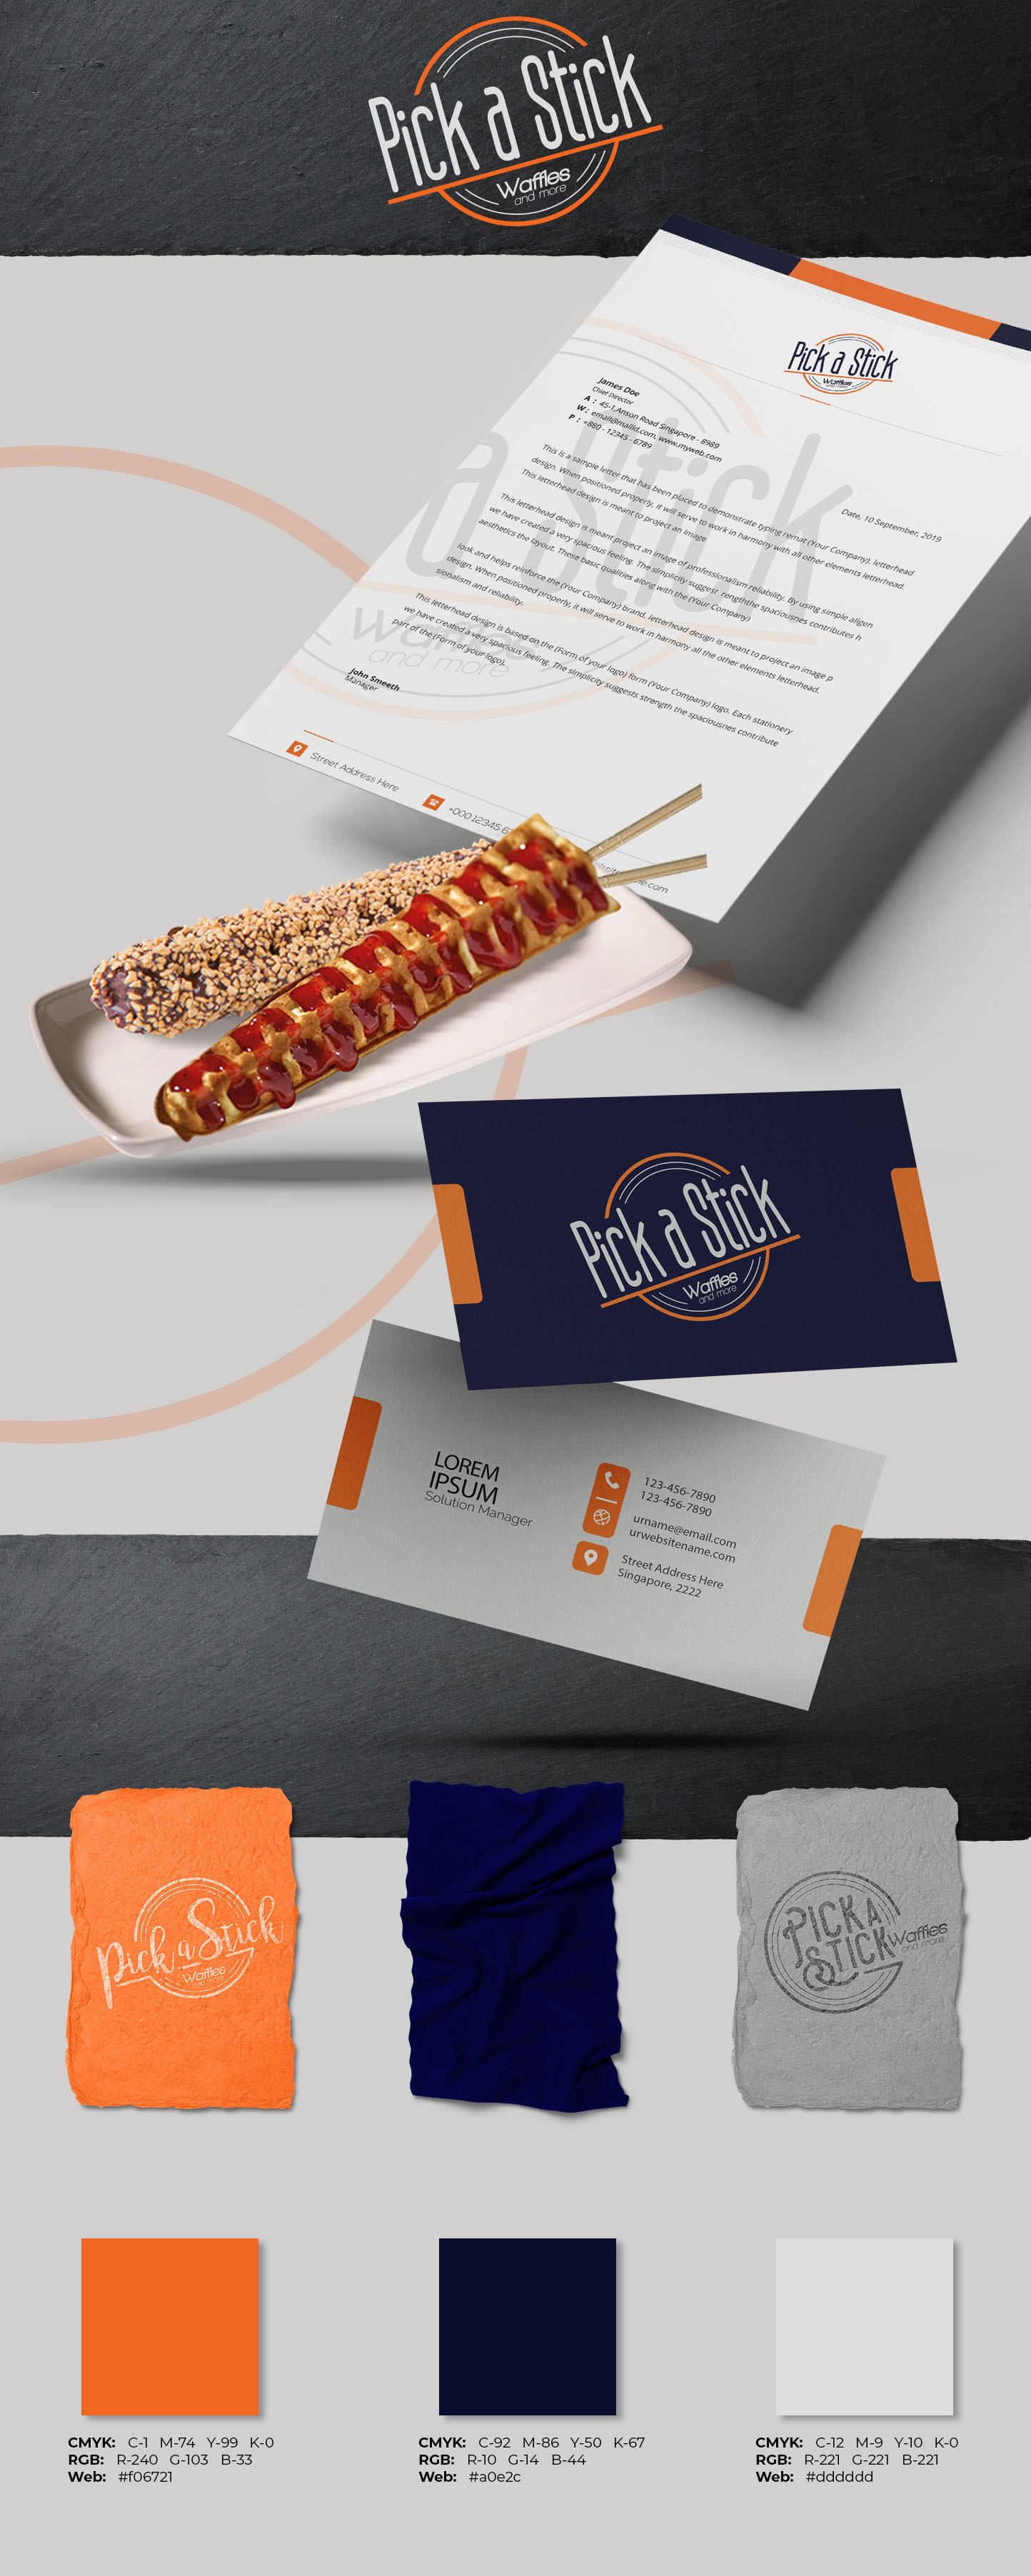 Waffle store branding and business card design